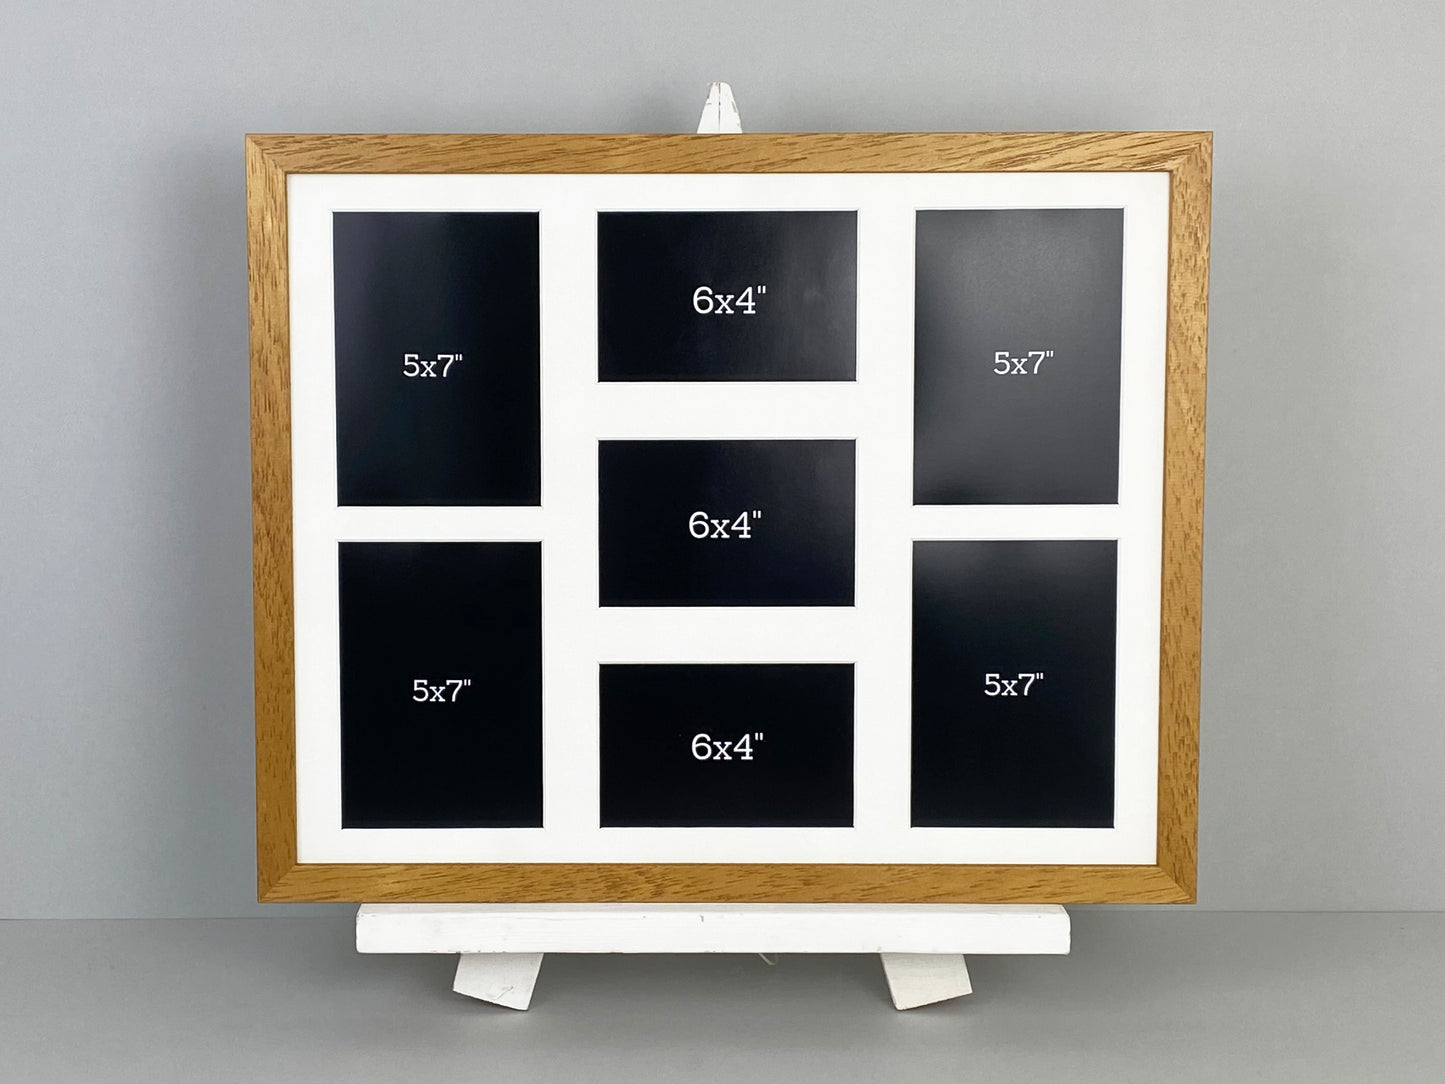 Suits Three 6x4" photos and Four 5x7" Photos.40x50cm. Wooden Multi Aperture Photo Frame. - PhotoFramesandMore - Wooden Picture Frames